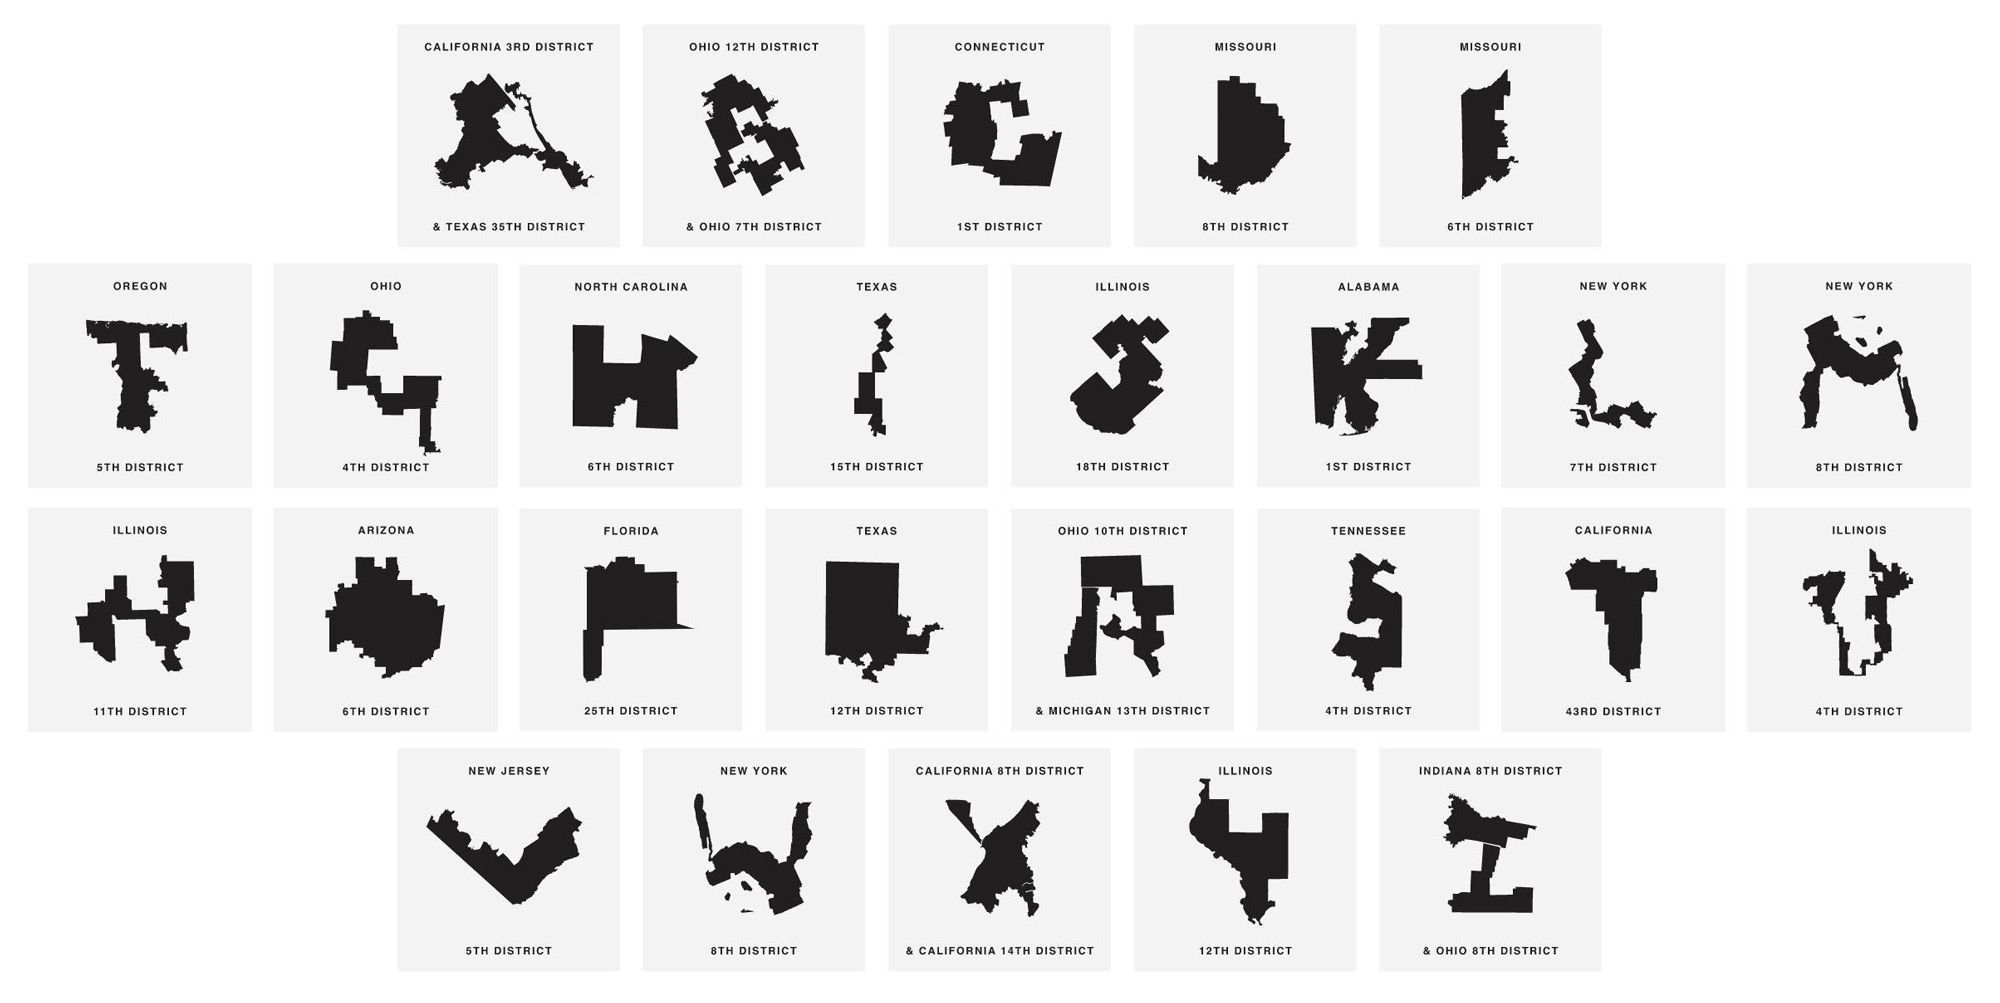 A New Font Created From the Silhouettes of Gerrymandered Electoral Districts